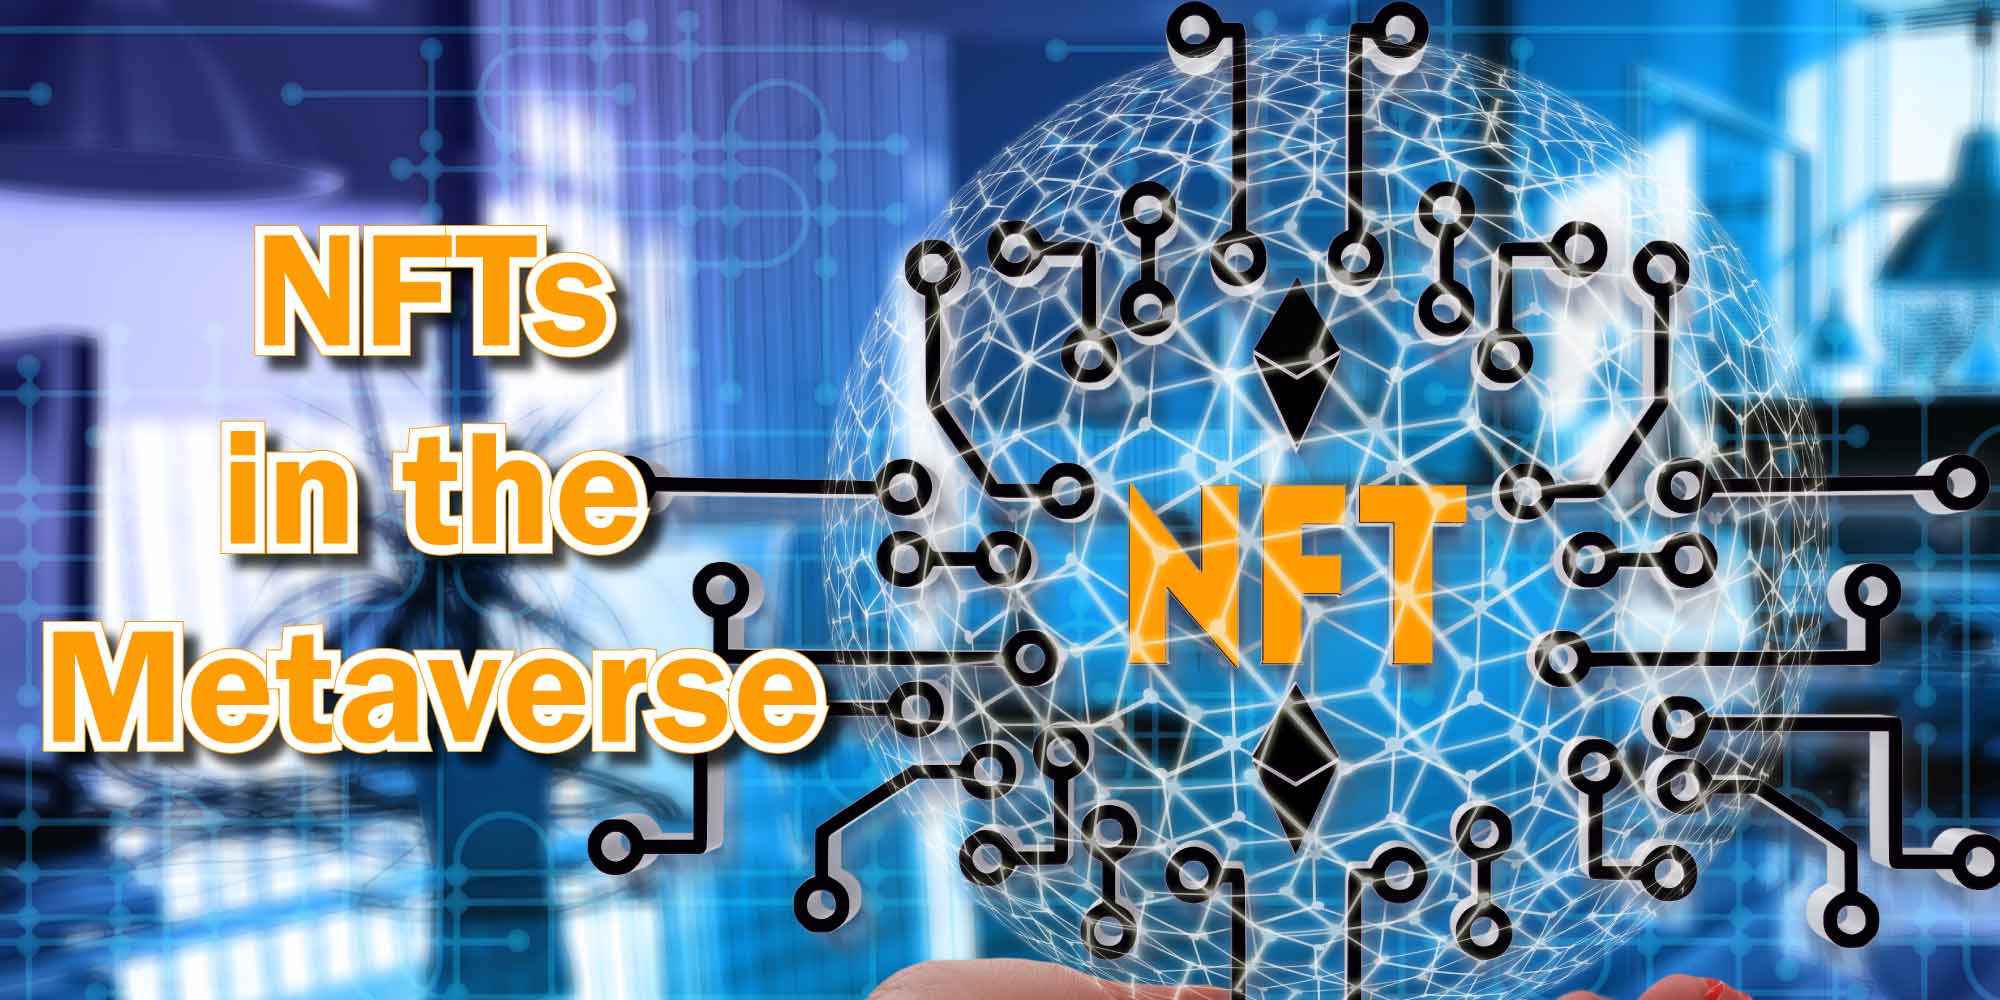 NFTs in the Metaverse